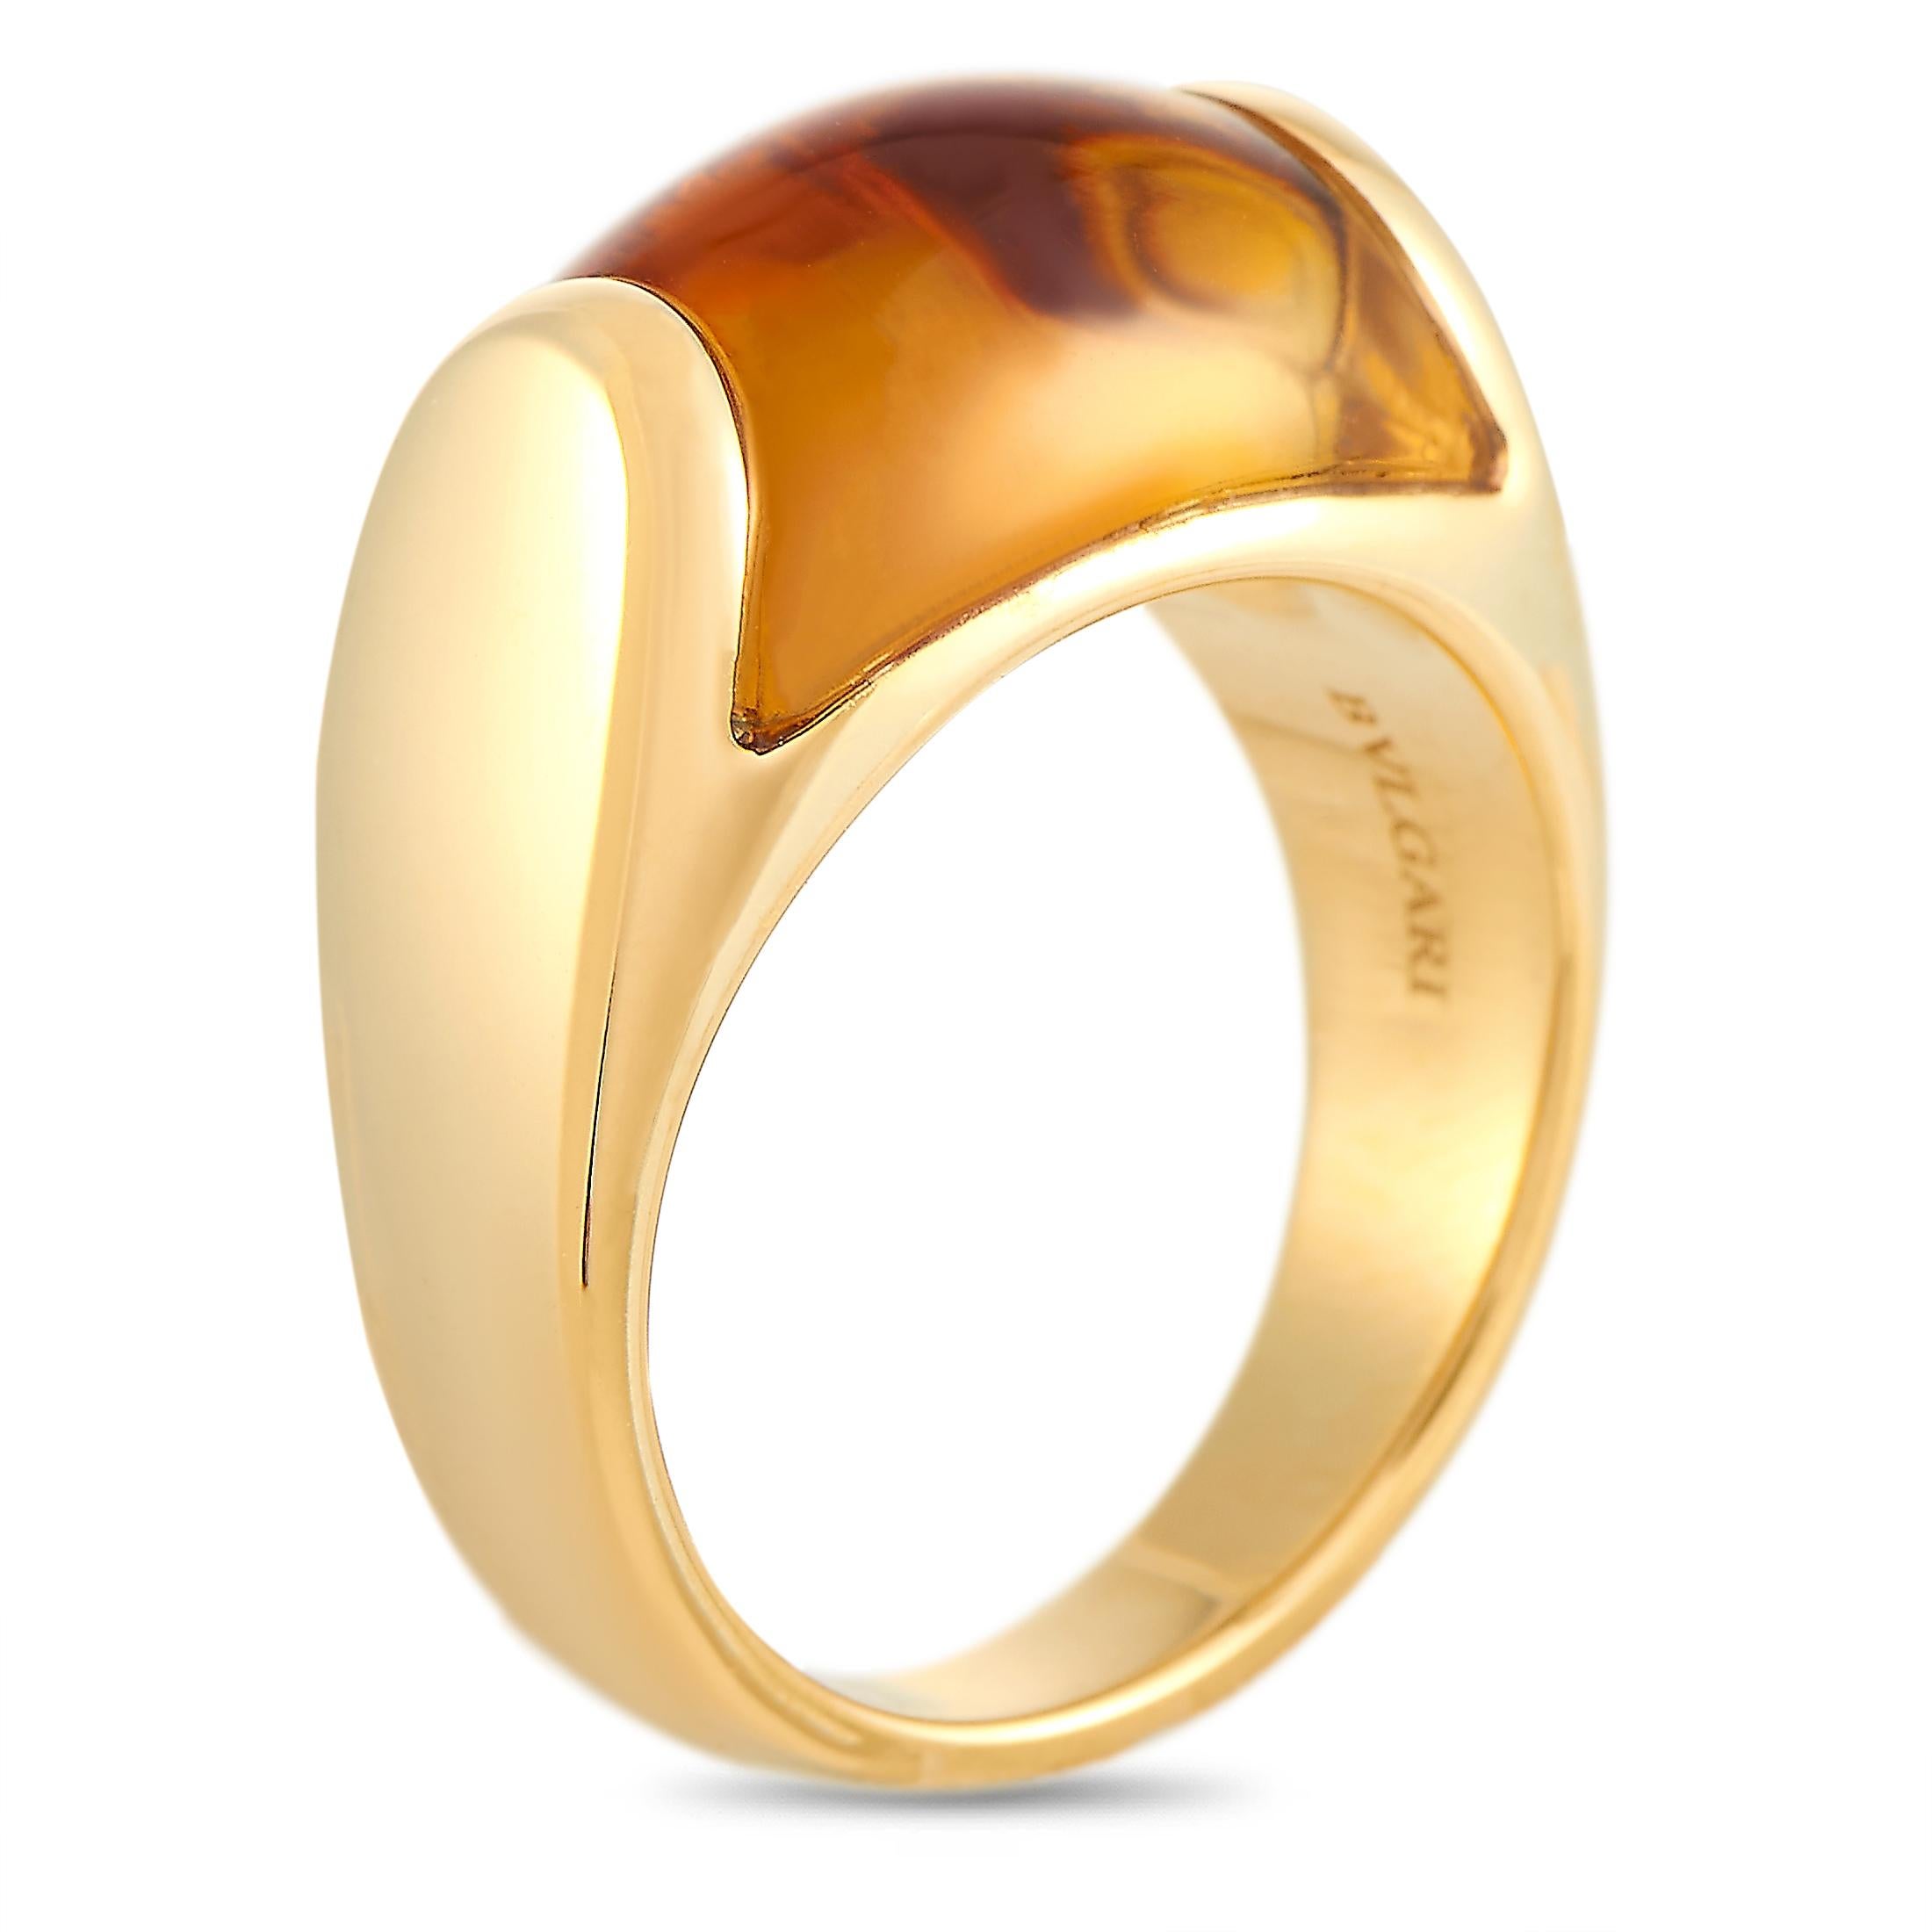 The Bvlgari “Tronchetto” ring is made out of 18K yellow gold and citrine and weighs 7.6 grams. The ring boasts band thickness of 3 mm and top height of 7 mm, while top dimensions measure 9 by 14 mm.
 
 This item is offered in estate condition and